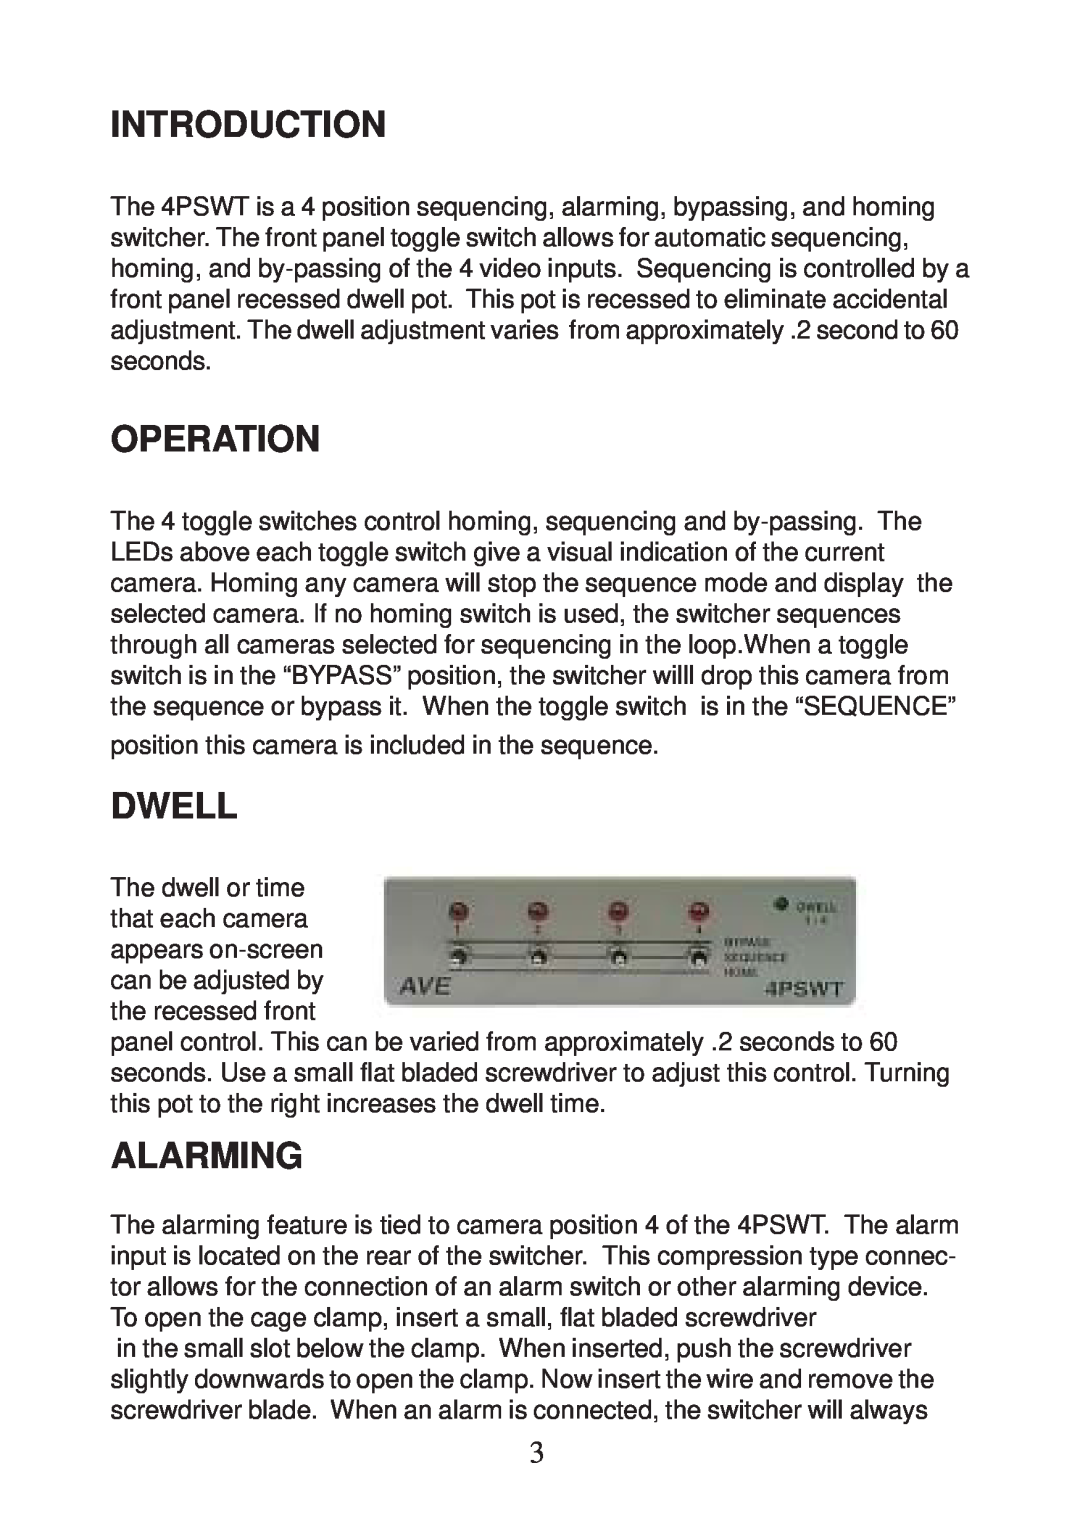 AVE 4PSWT operation manual Introduction, Operation, Dwell, Alarming 